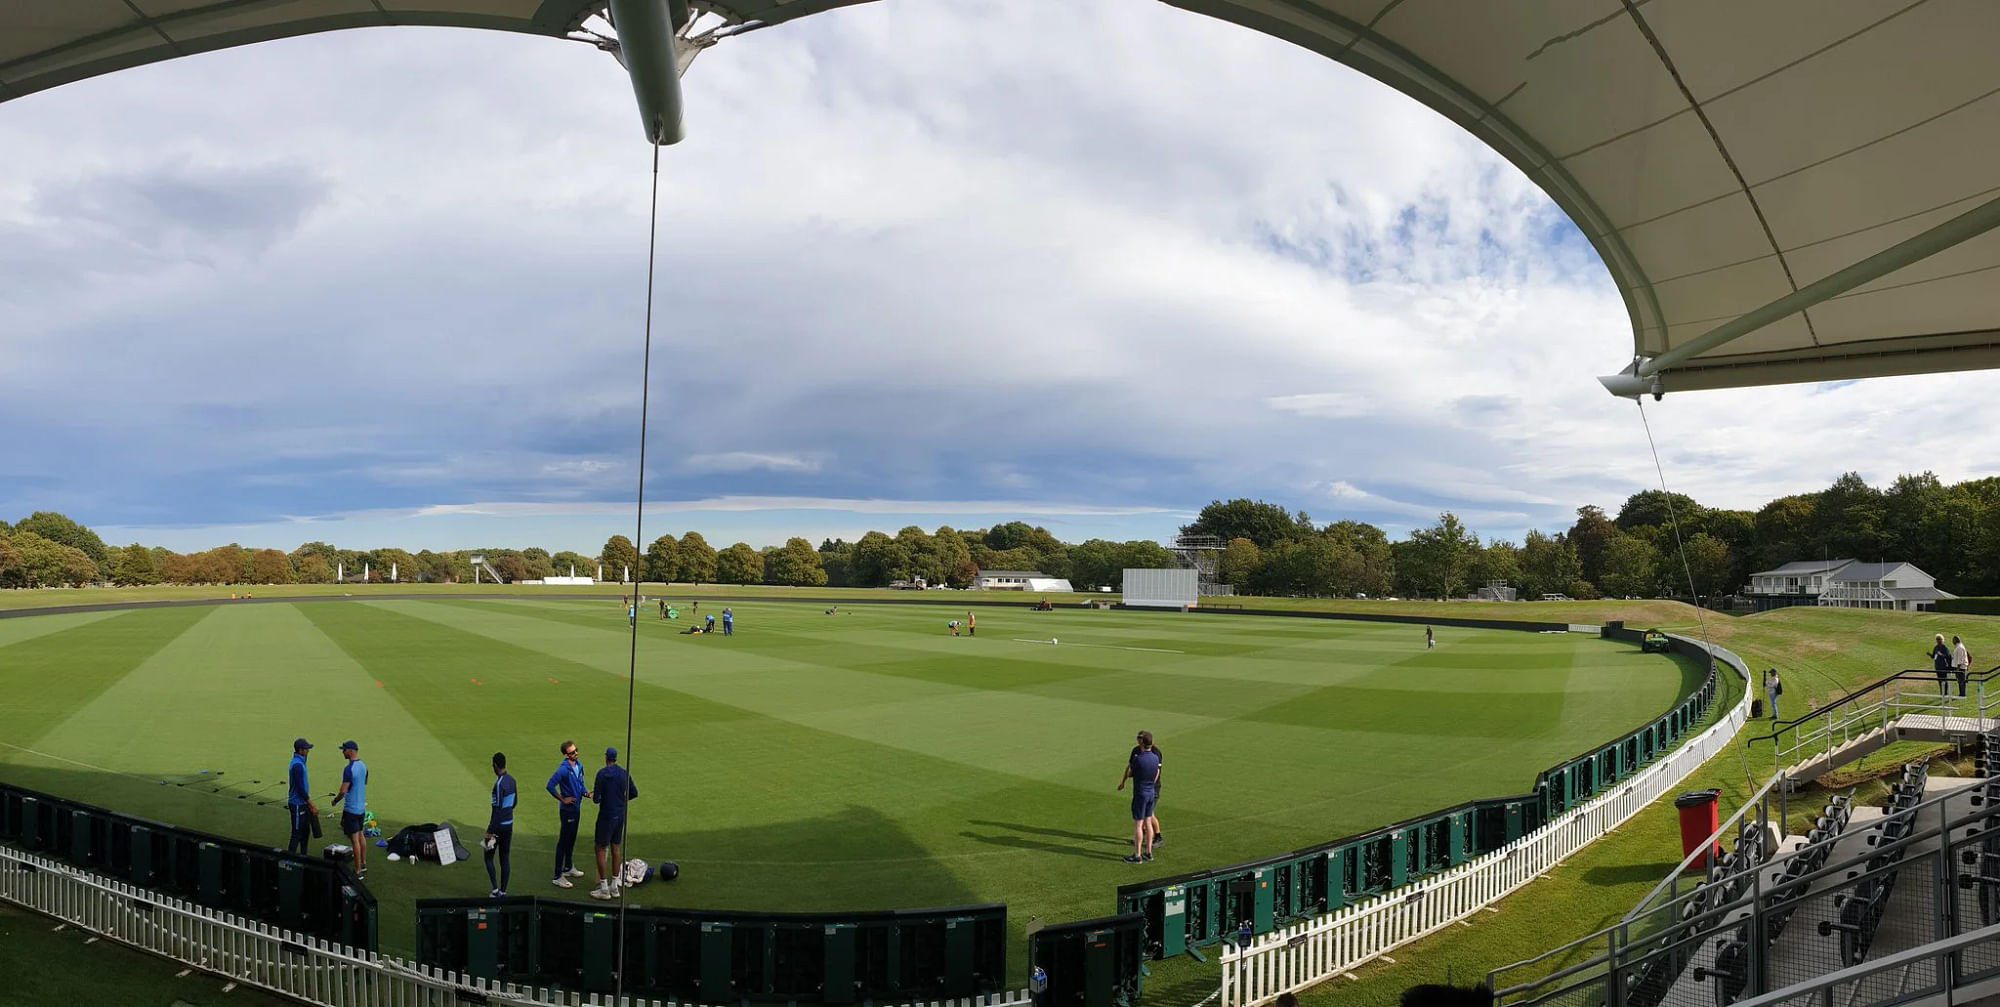 India vs New Zealand 2nd Test To Be Played at Hagley Oval in Christchurch.